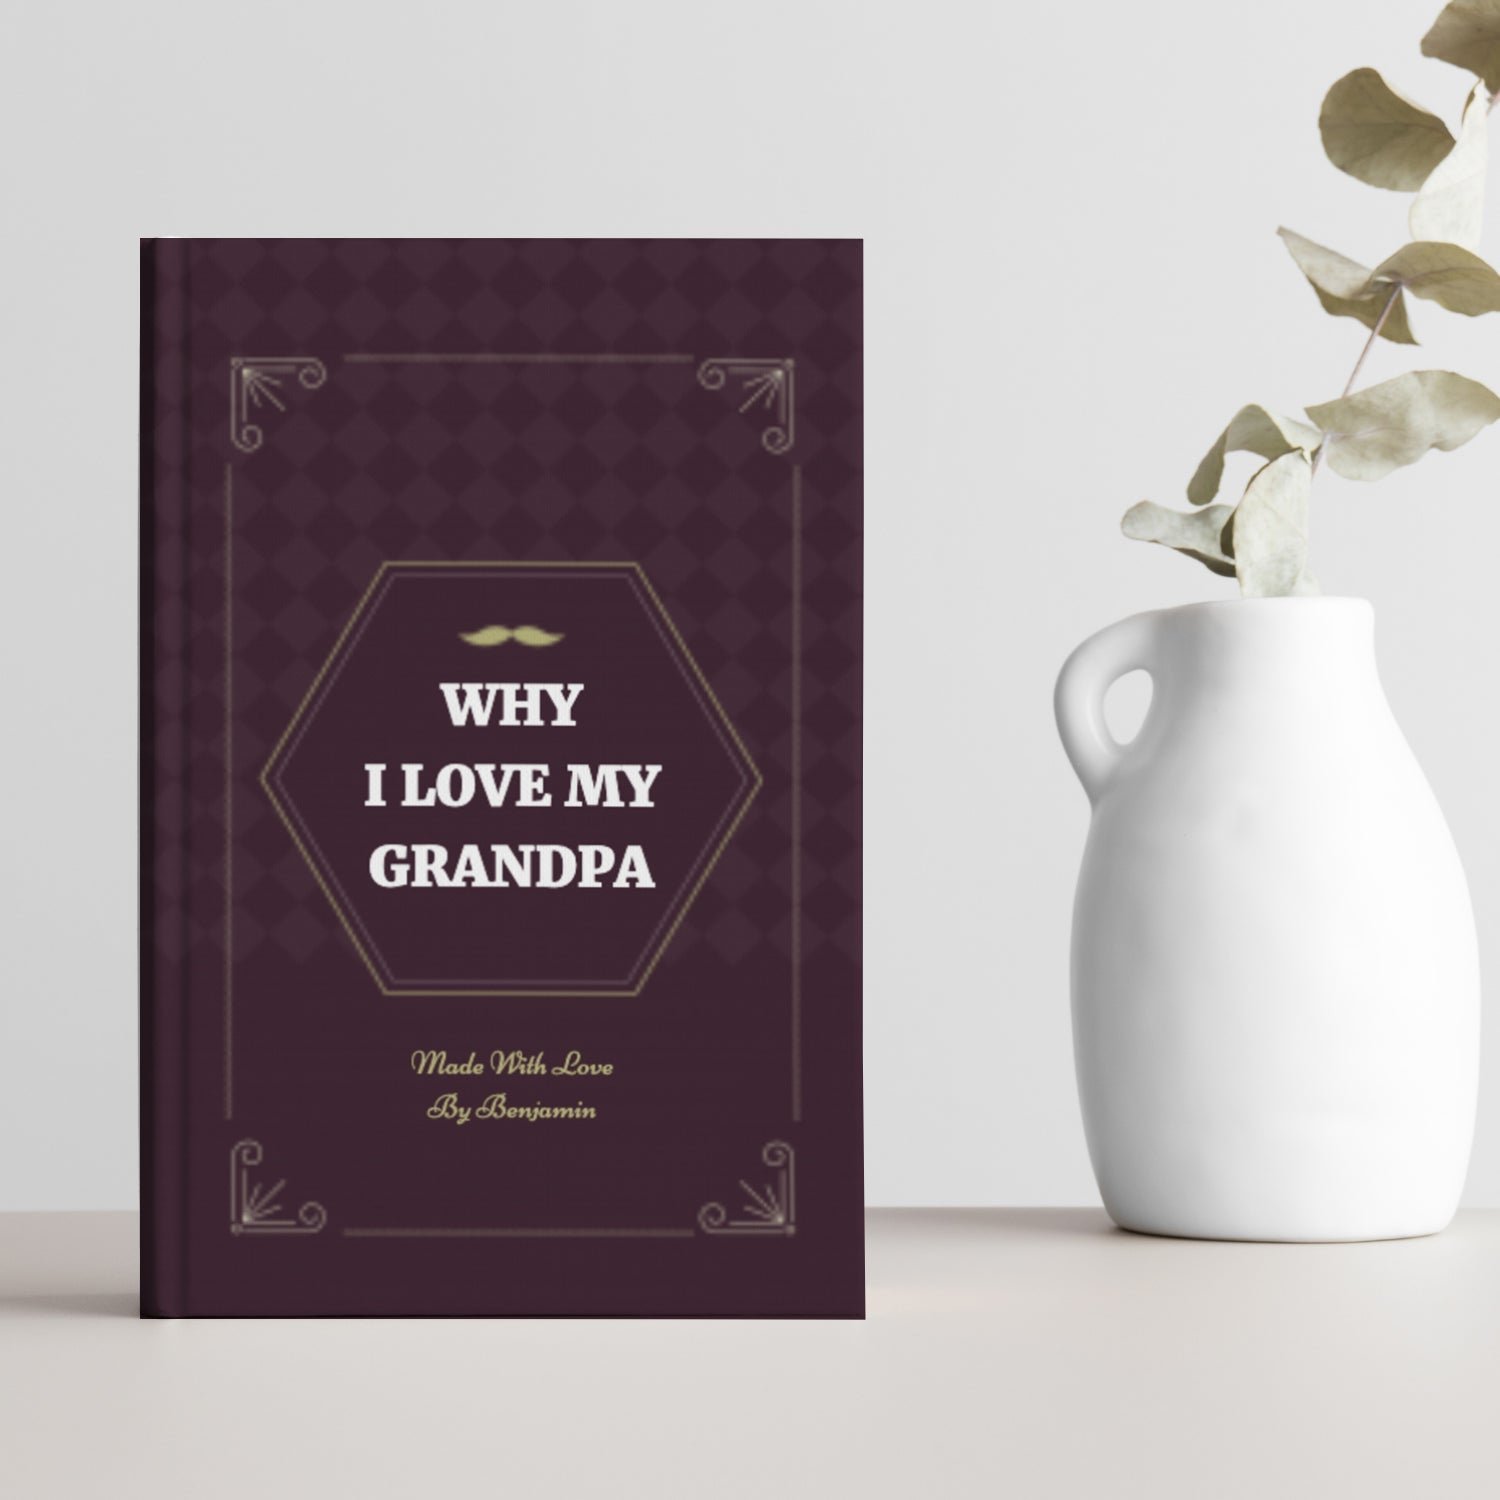 Make a Personalized Book for Grandpa, Gifts For Grandpa From Kids - Luhvee Books